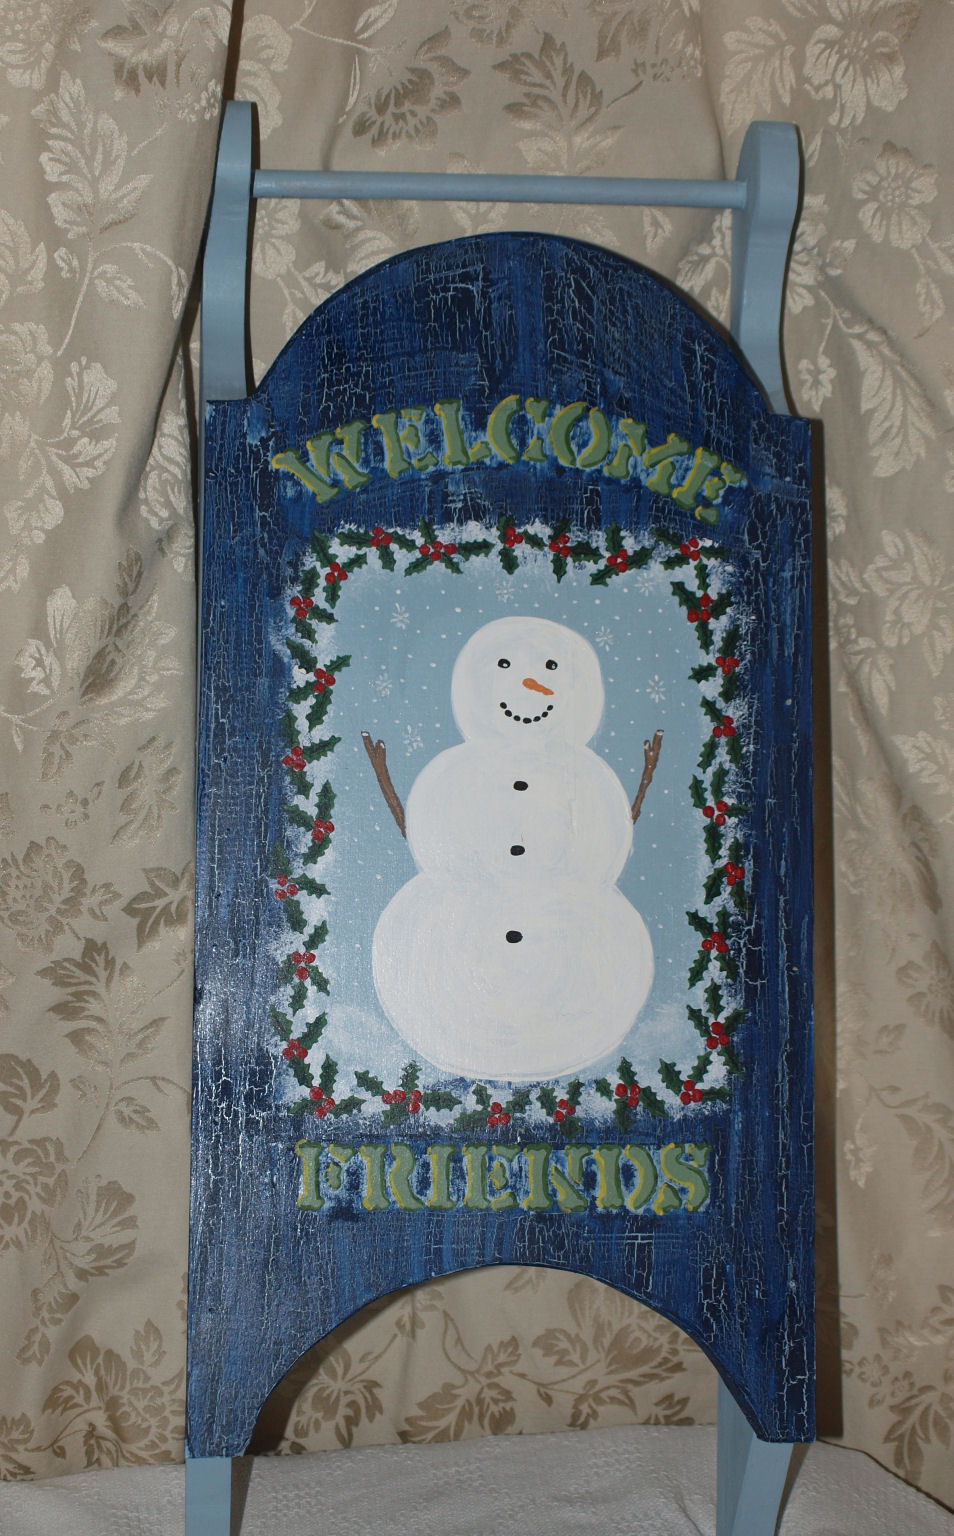 Snowman painted on sled